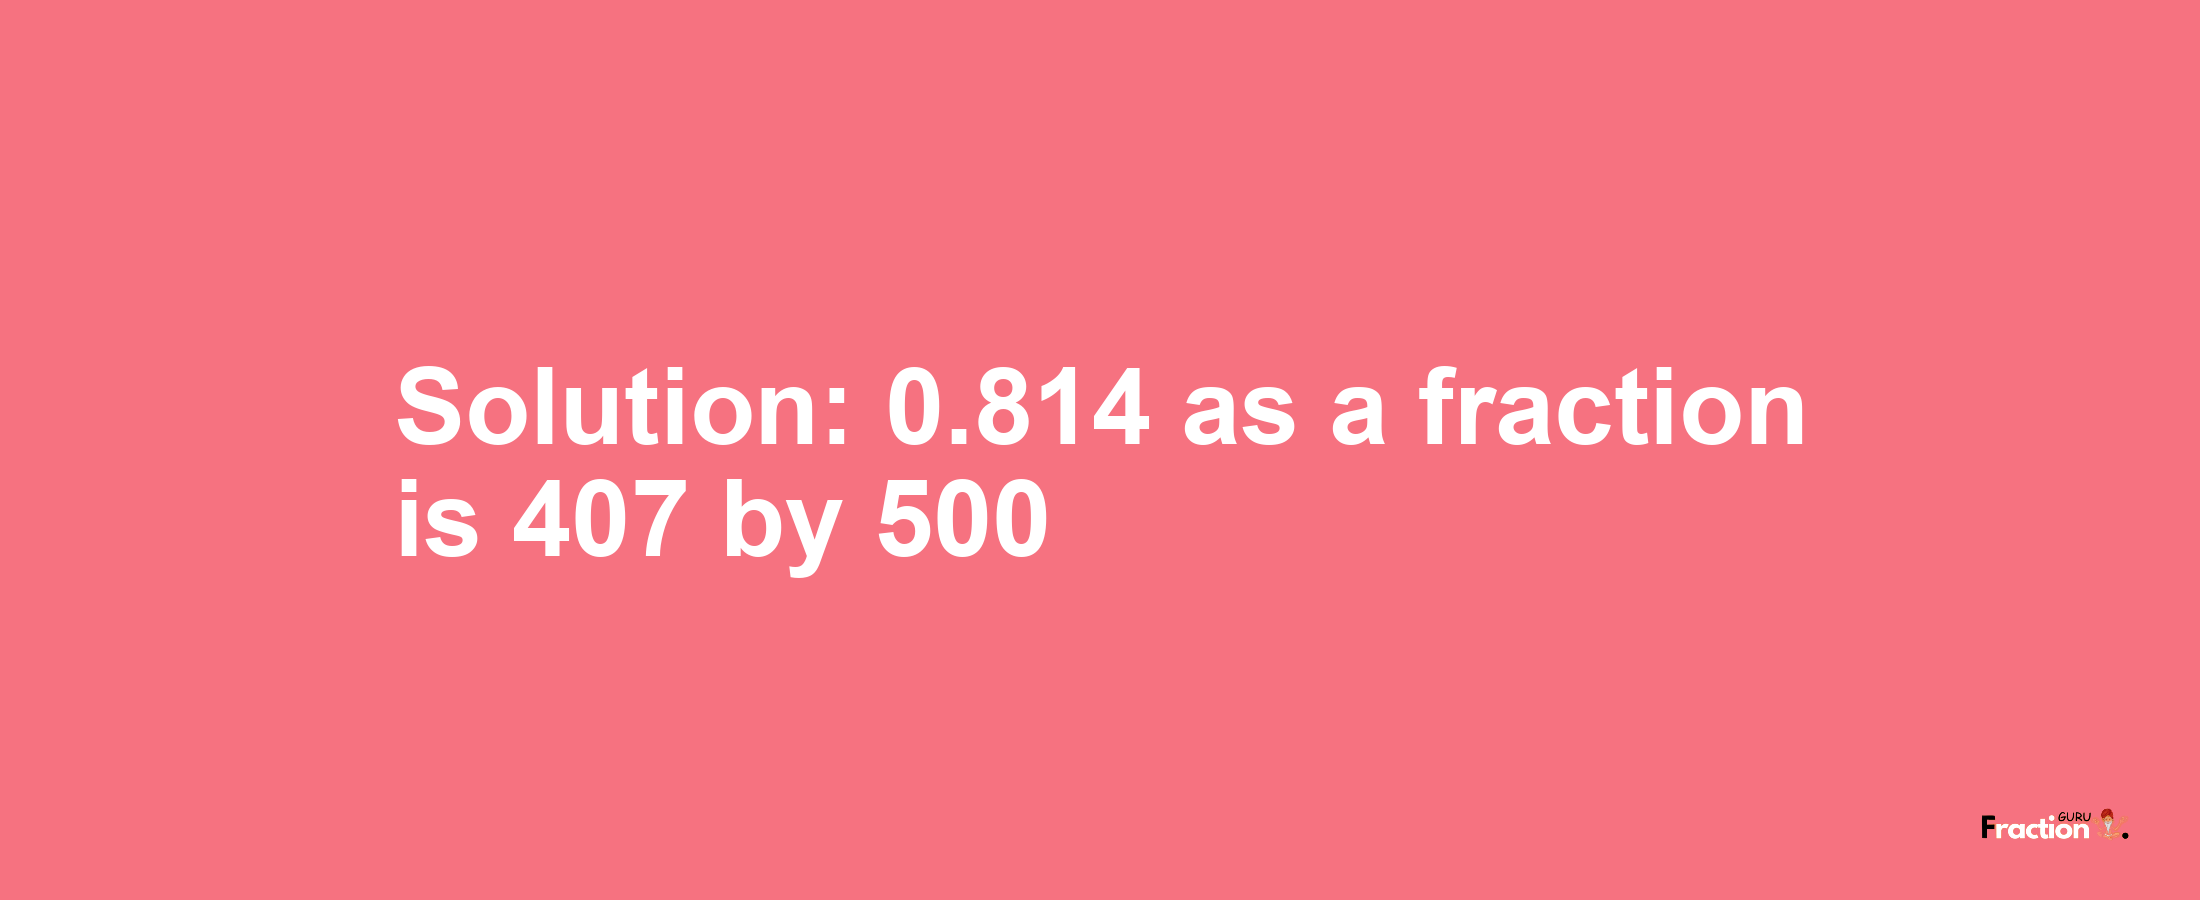 Solution:0.814 as a fraction is 407/500